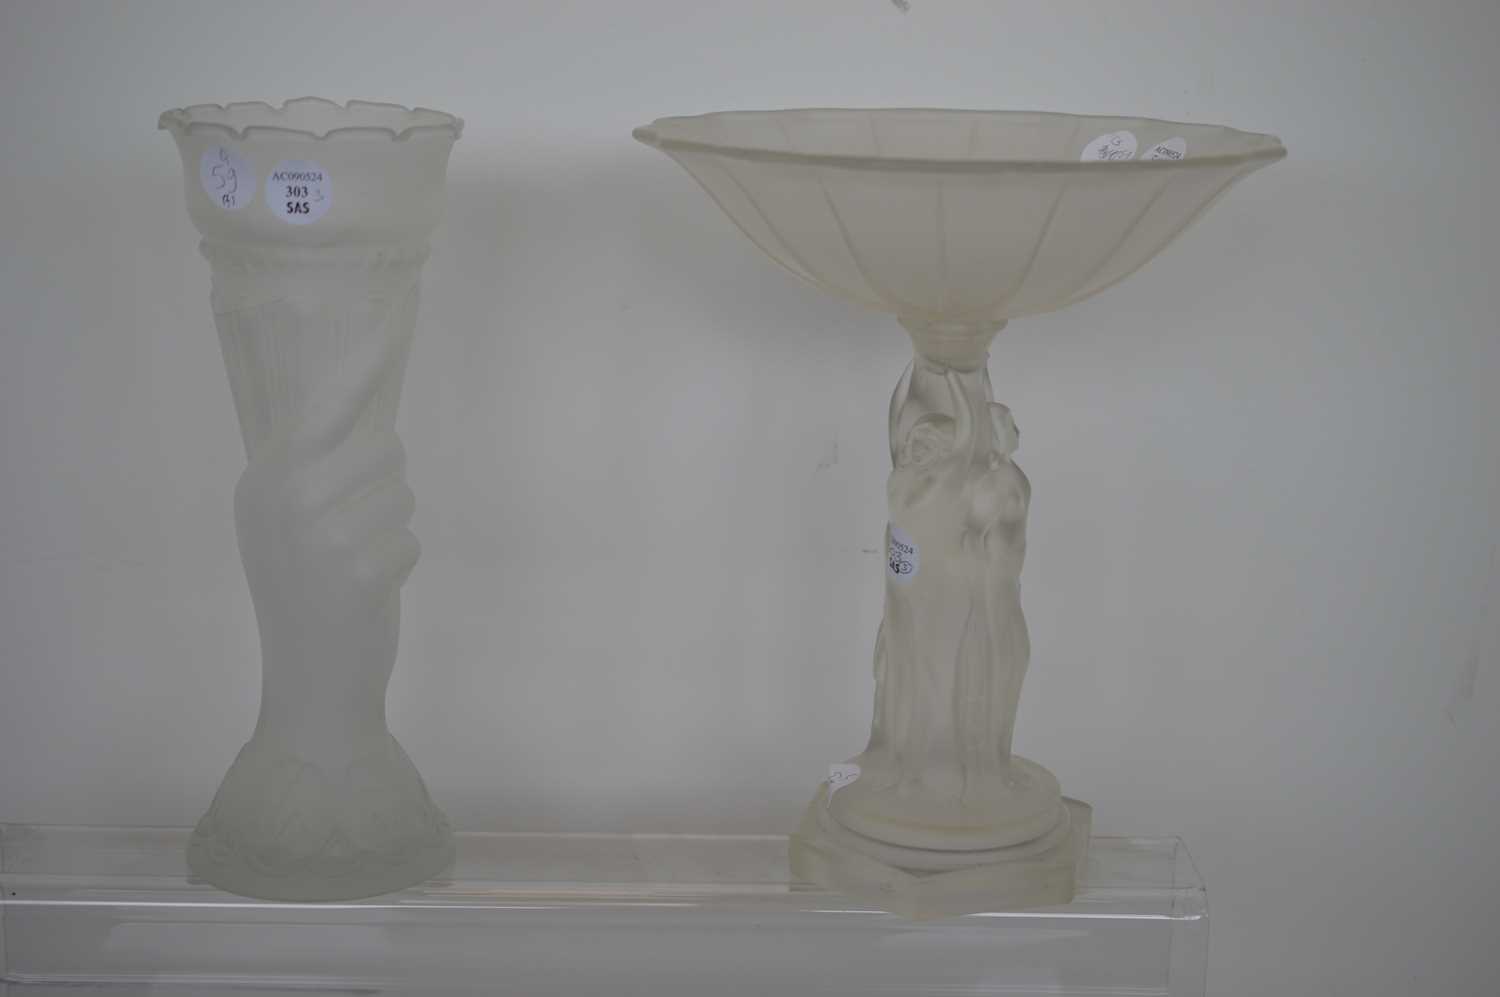 An Art Deco style frosted glass compote or tazza together with a frosted glass vase,